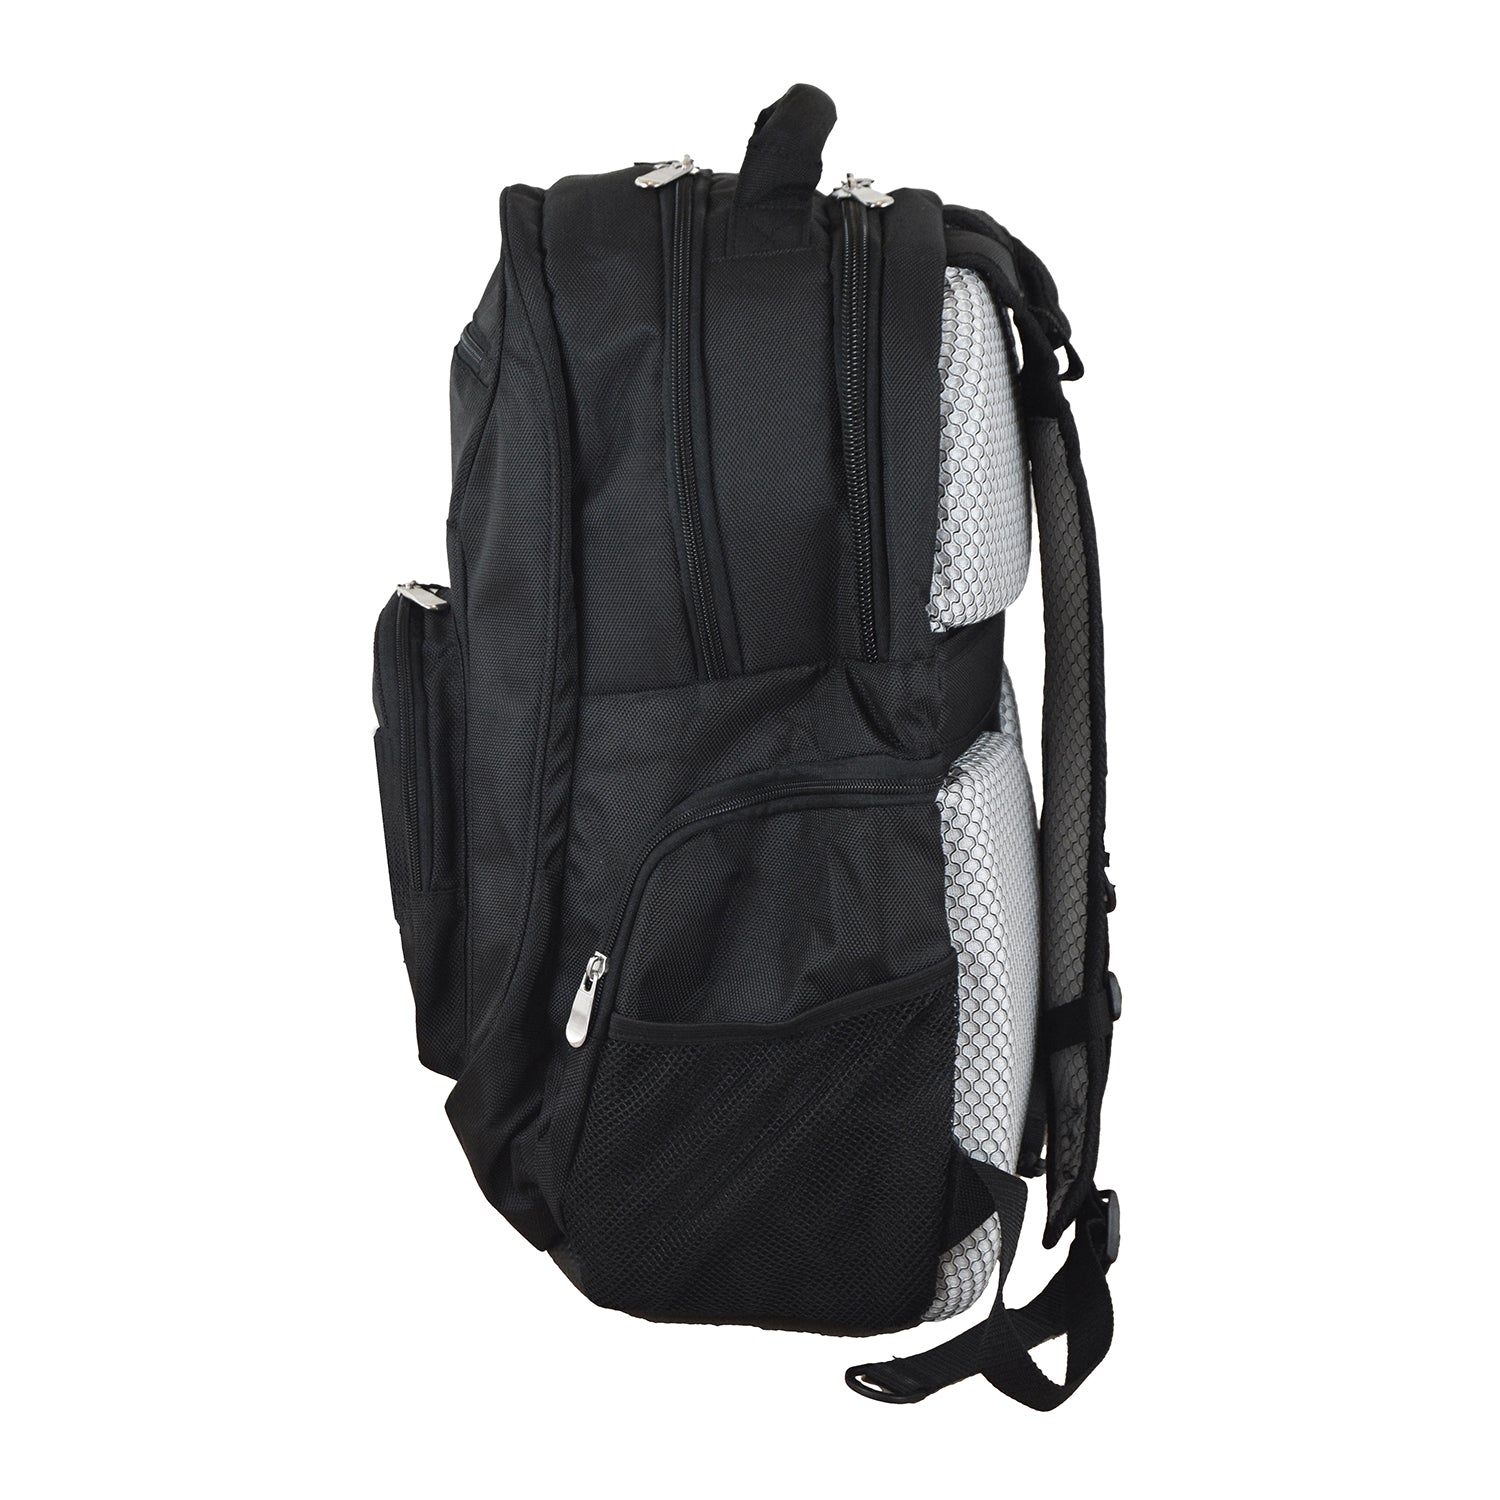 Team Mexico Premium Laptop Backpack - Fits Most 17 Inch Laptops and Tablets - Ideal for Work, Travel, School, College, and Commuting